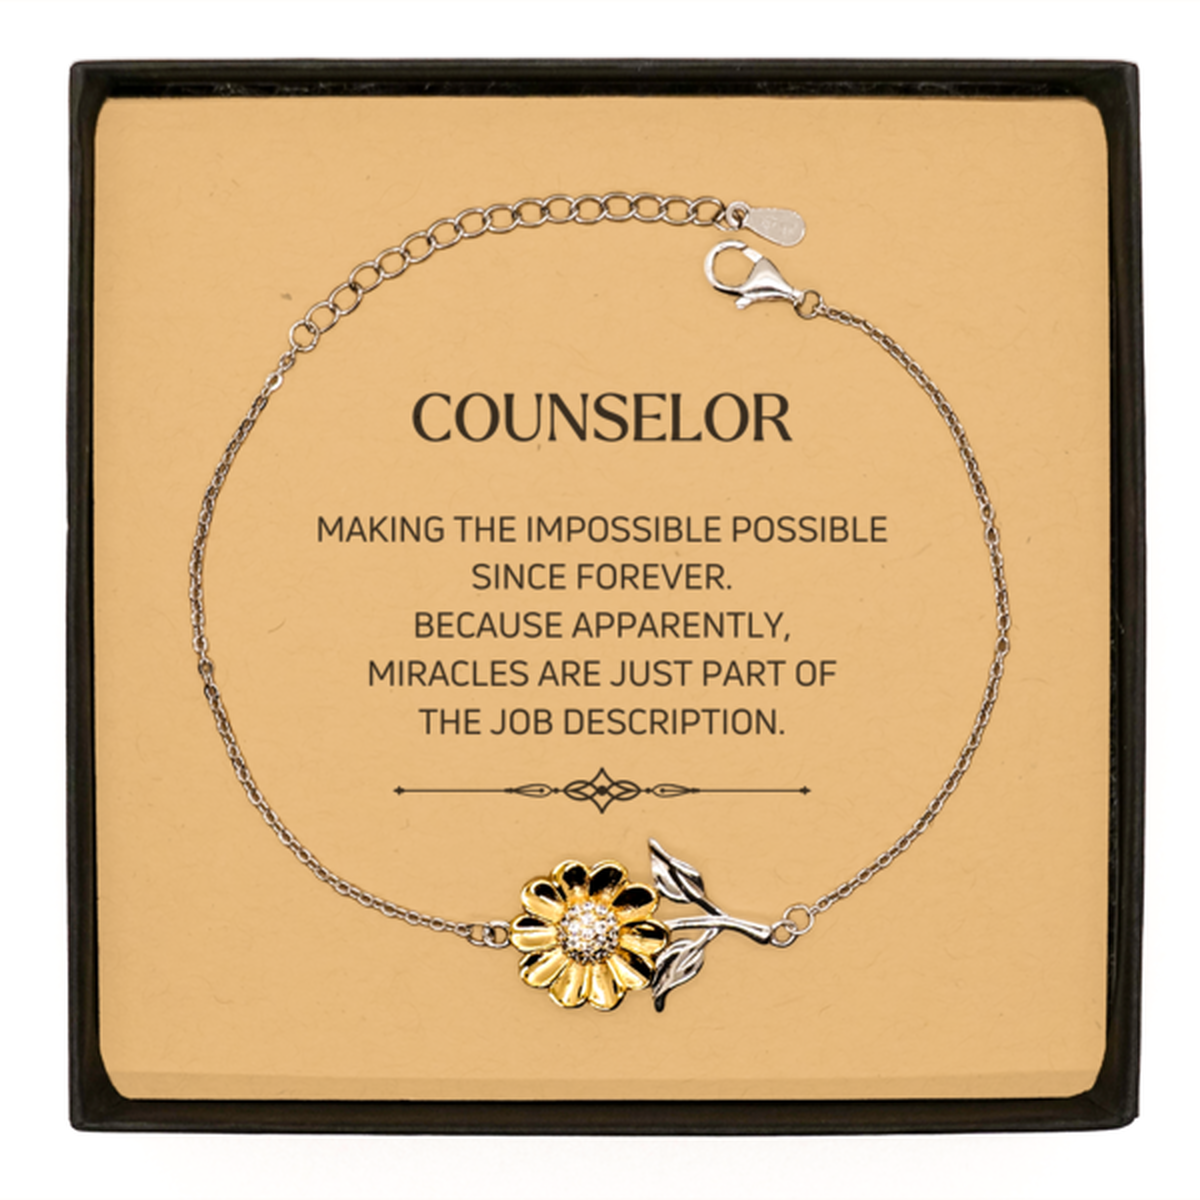 Funny Counselor Gifts, Miracles are just part of the job description, Inspirational Birthday Sunflower Bracelet For Counselor, Men, Women, Coworkers, Friends, Boss